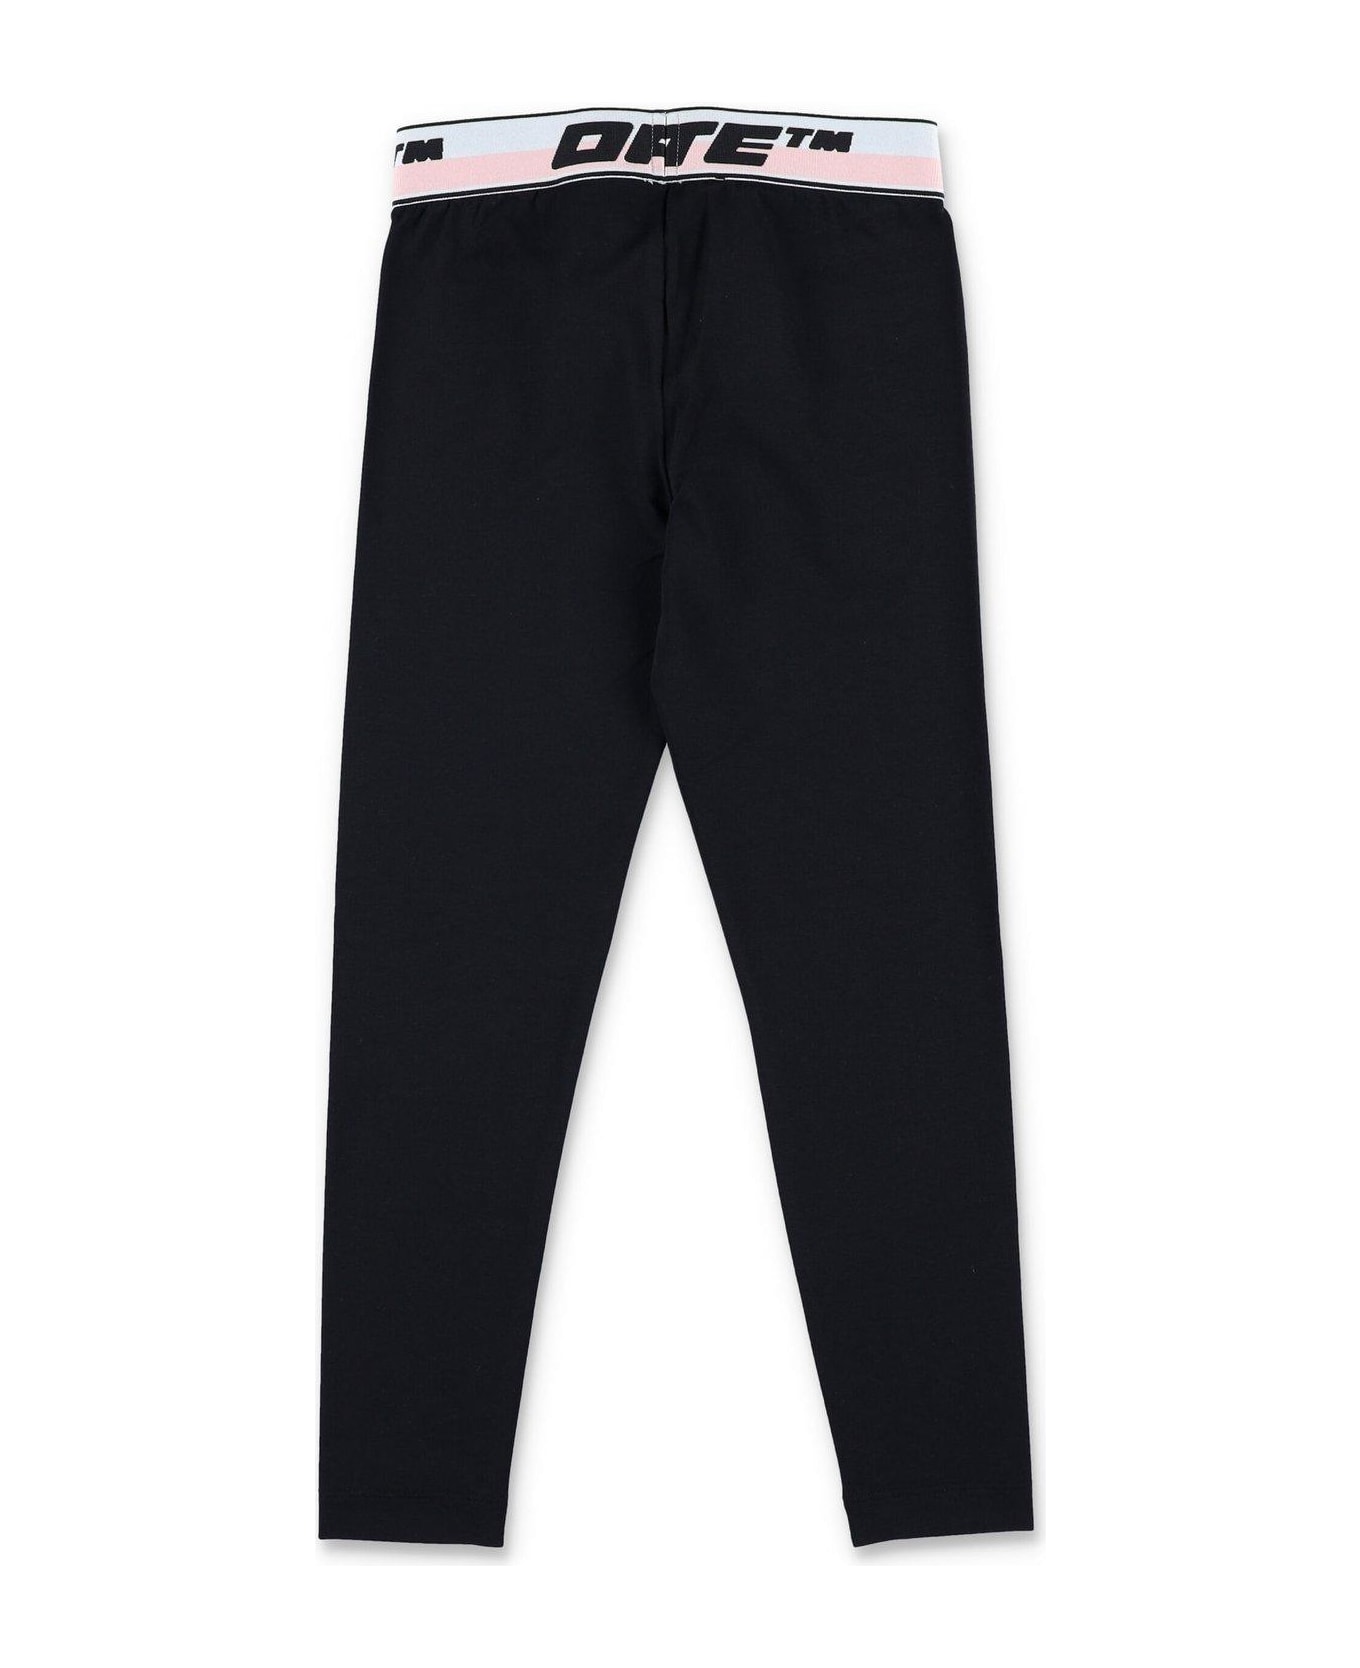 Off-White Stretched Mid Rise Leggings - Black Blac